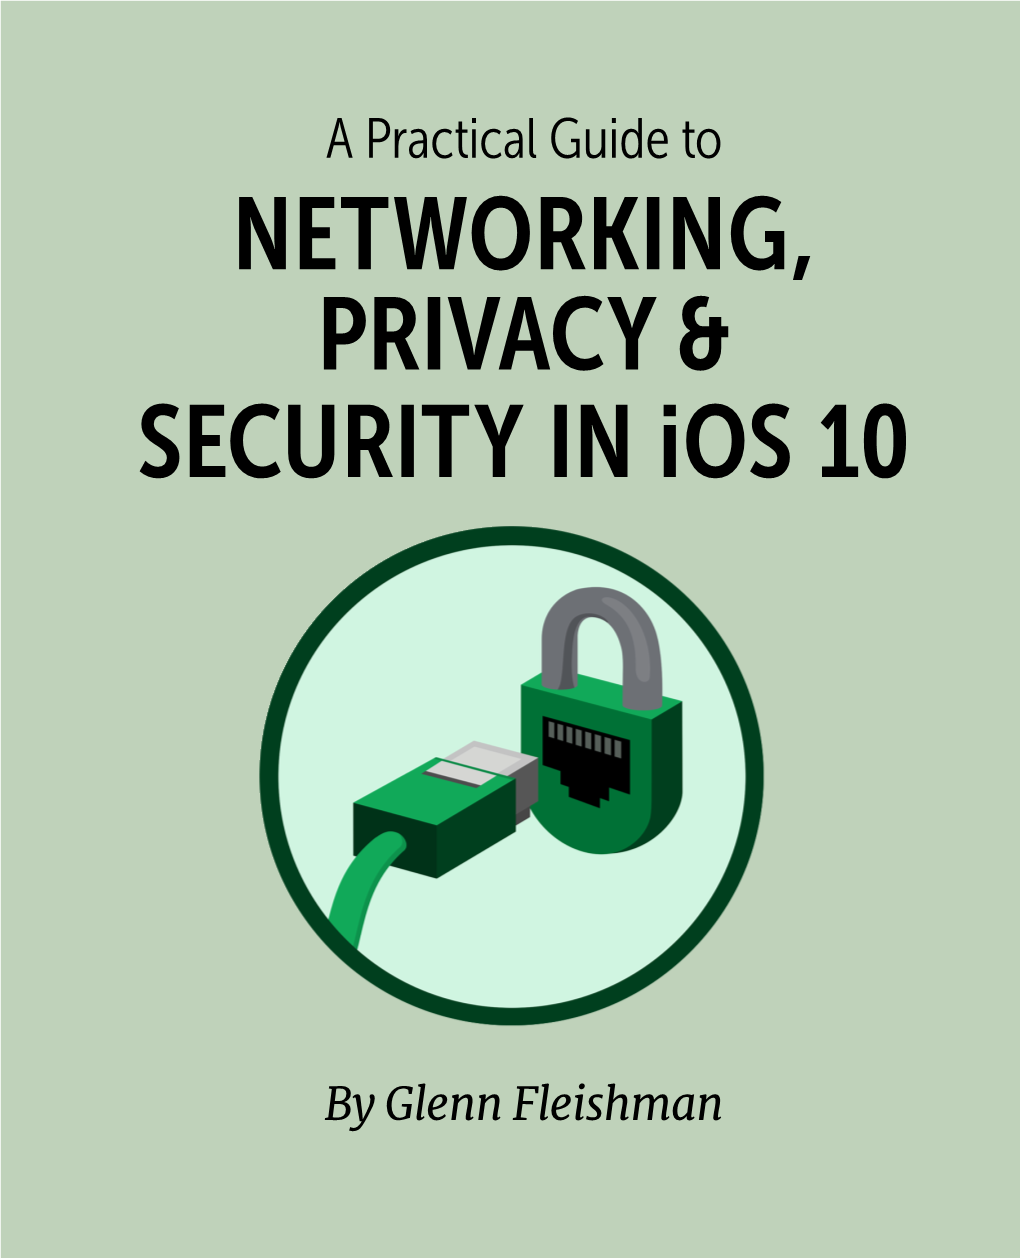 A Practical Guide to Networking, Privacy & Security in Ios 10